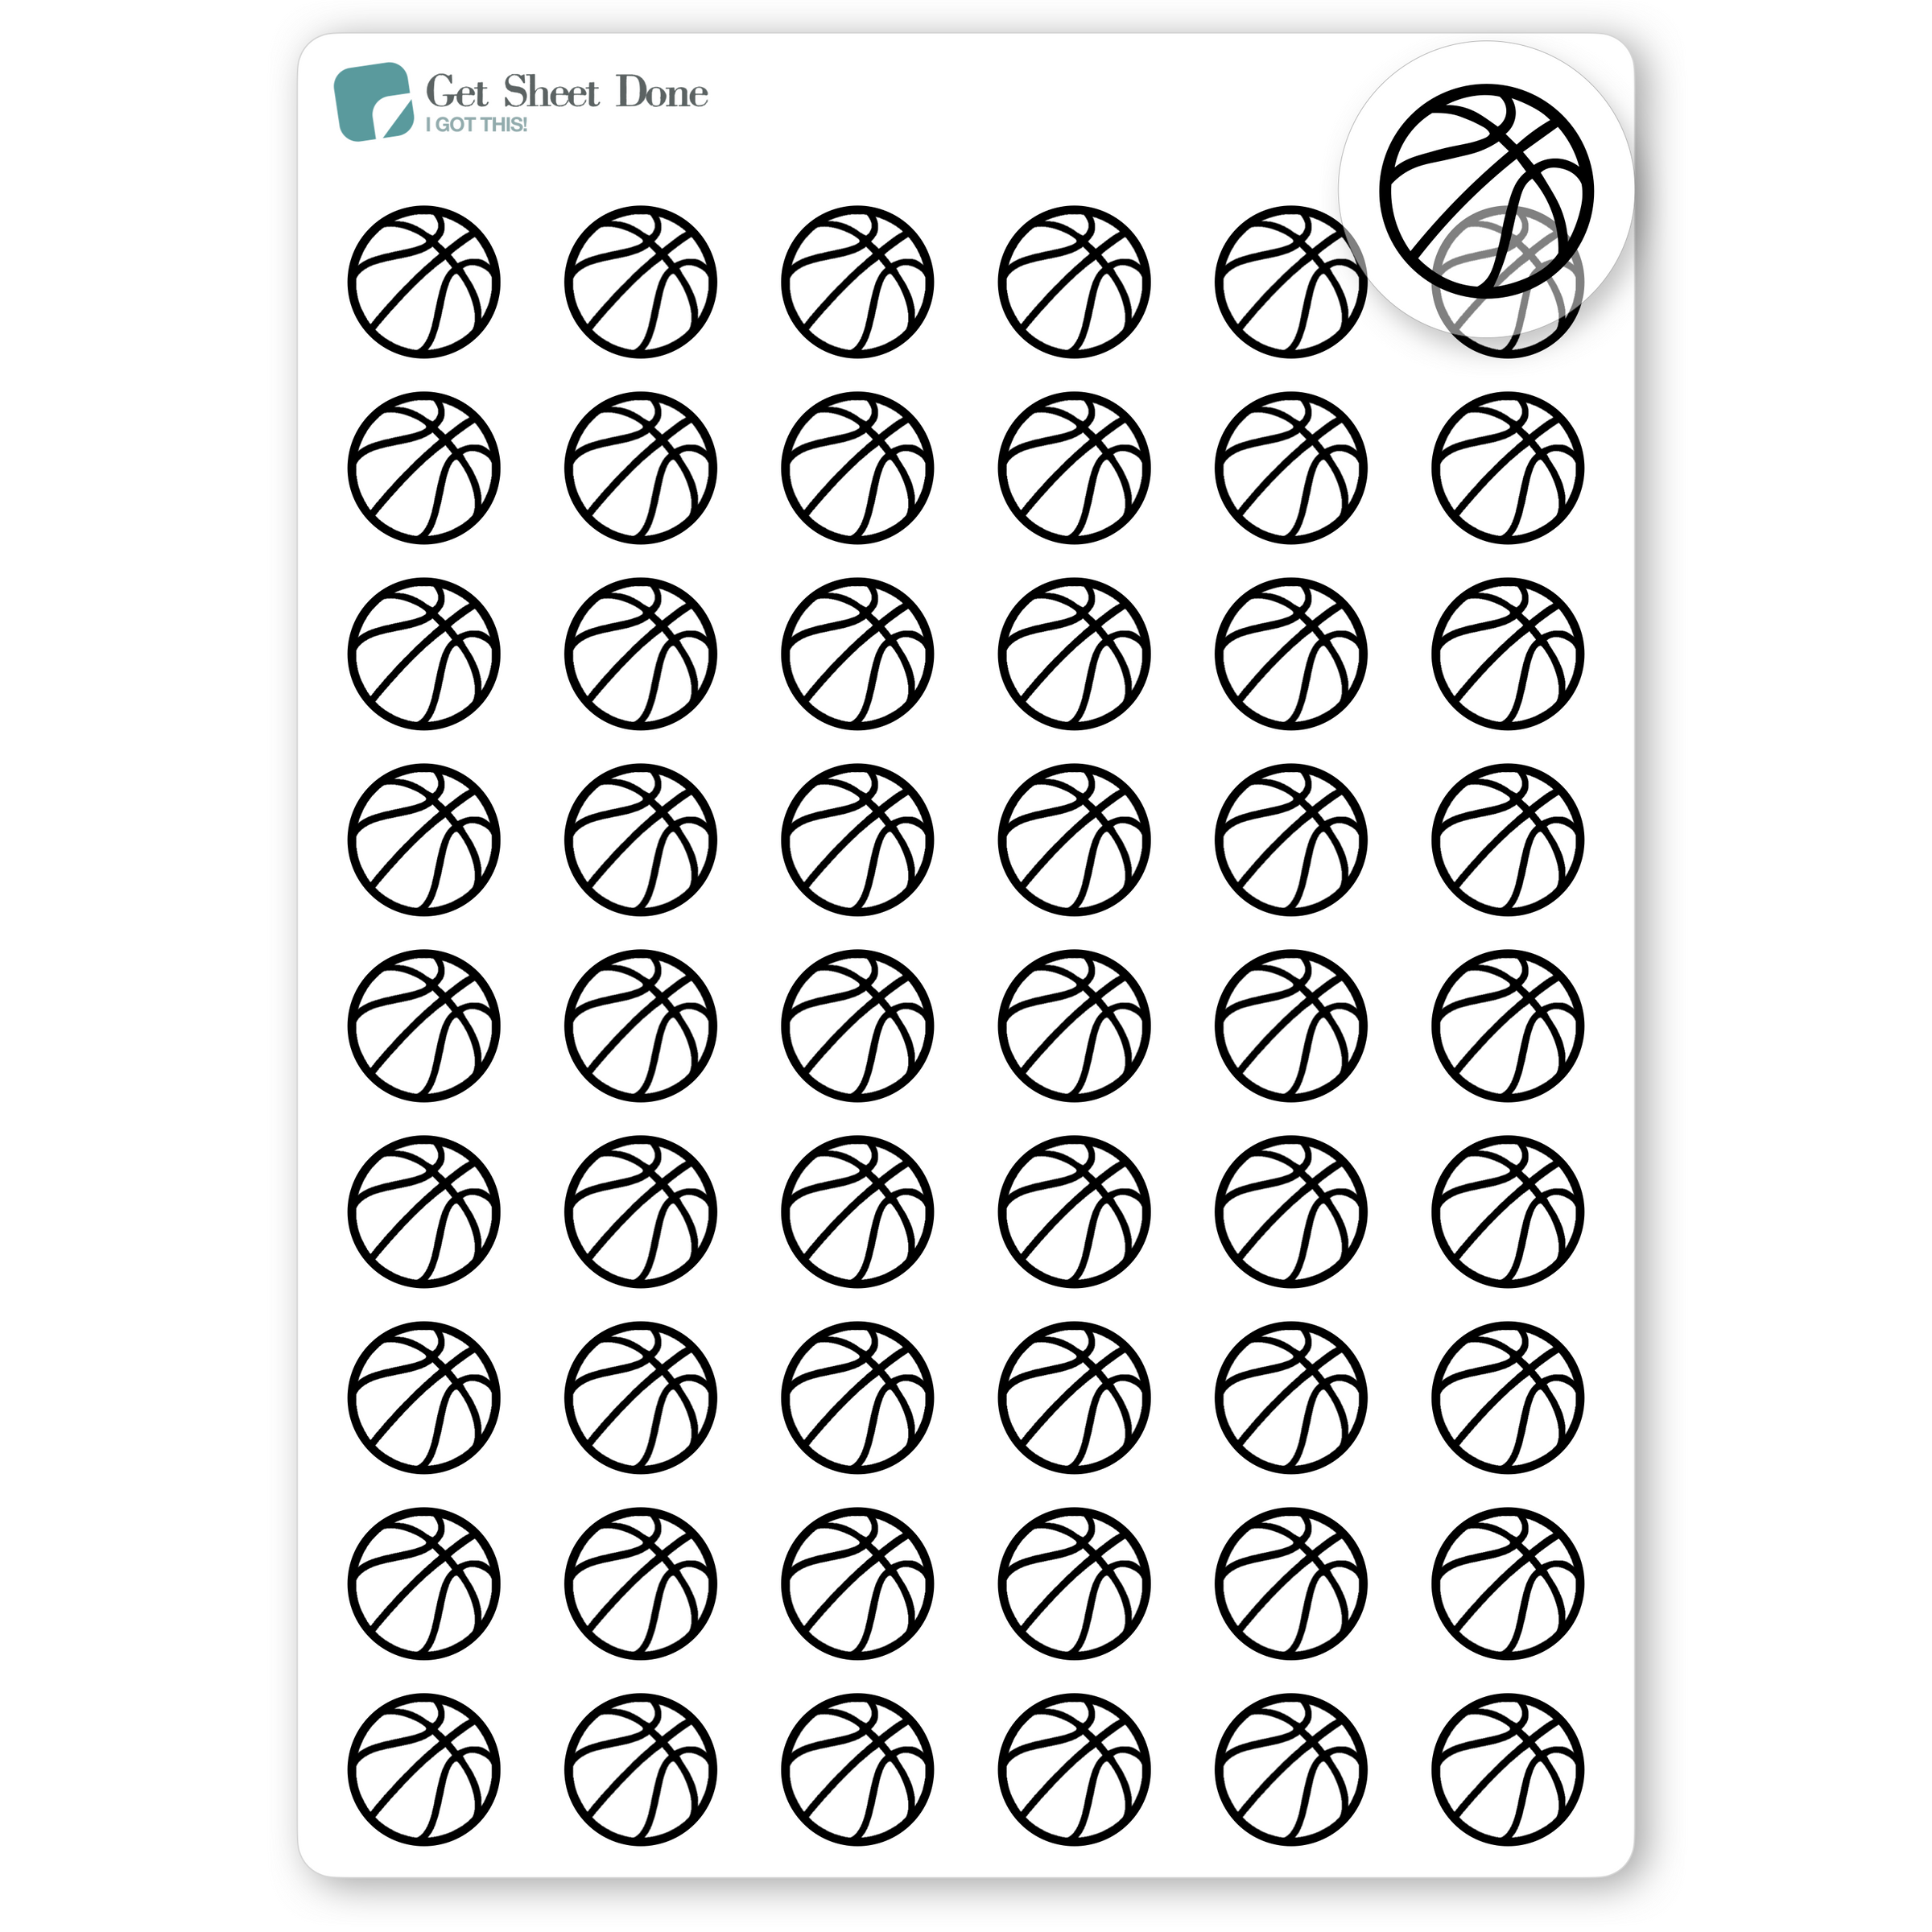 Foiled Basketball Stickers.